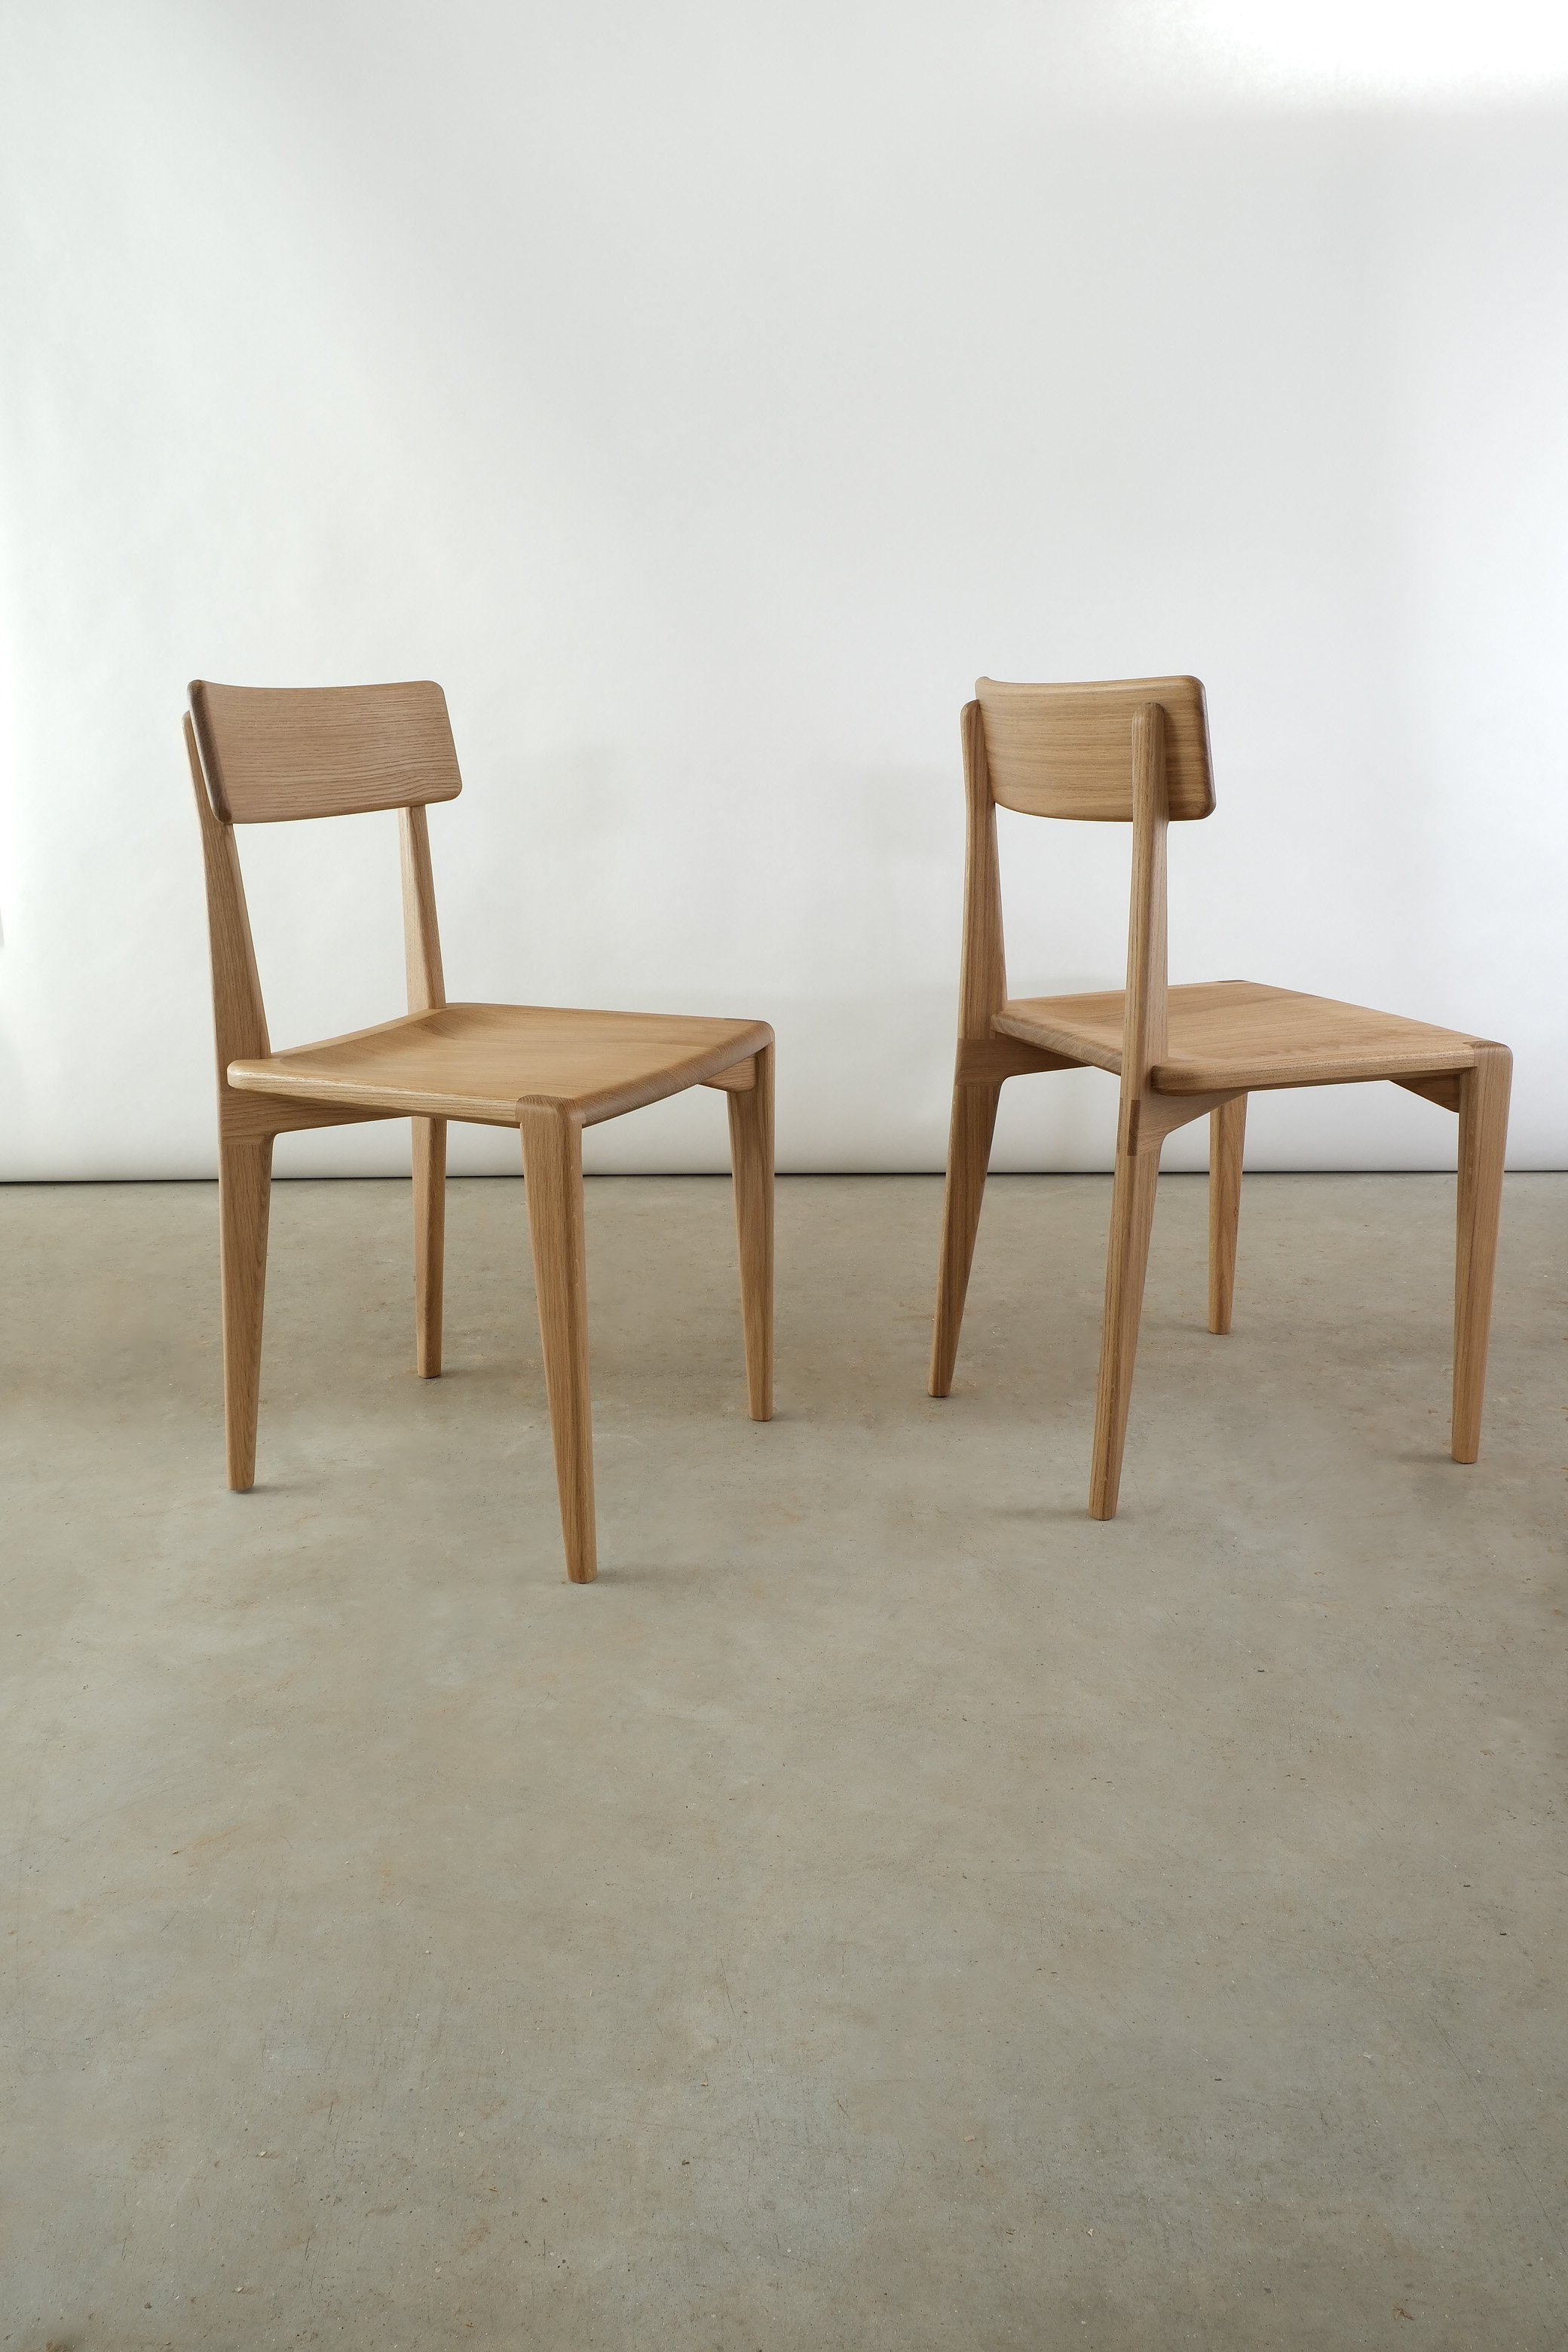 durham chairs in oak with white background .JPG